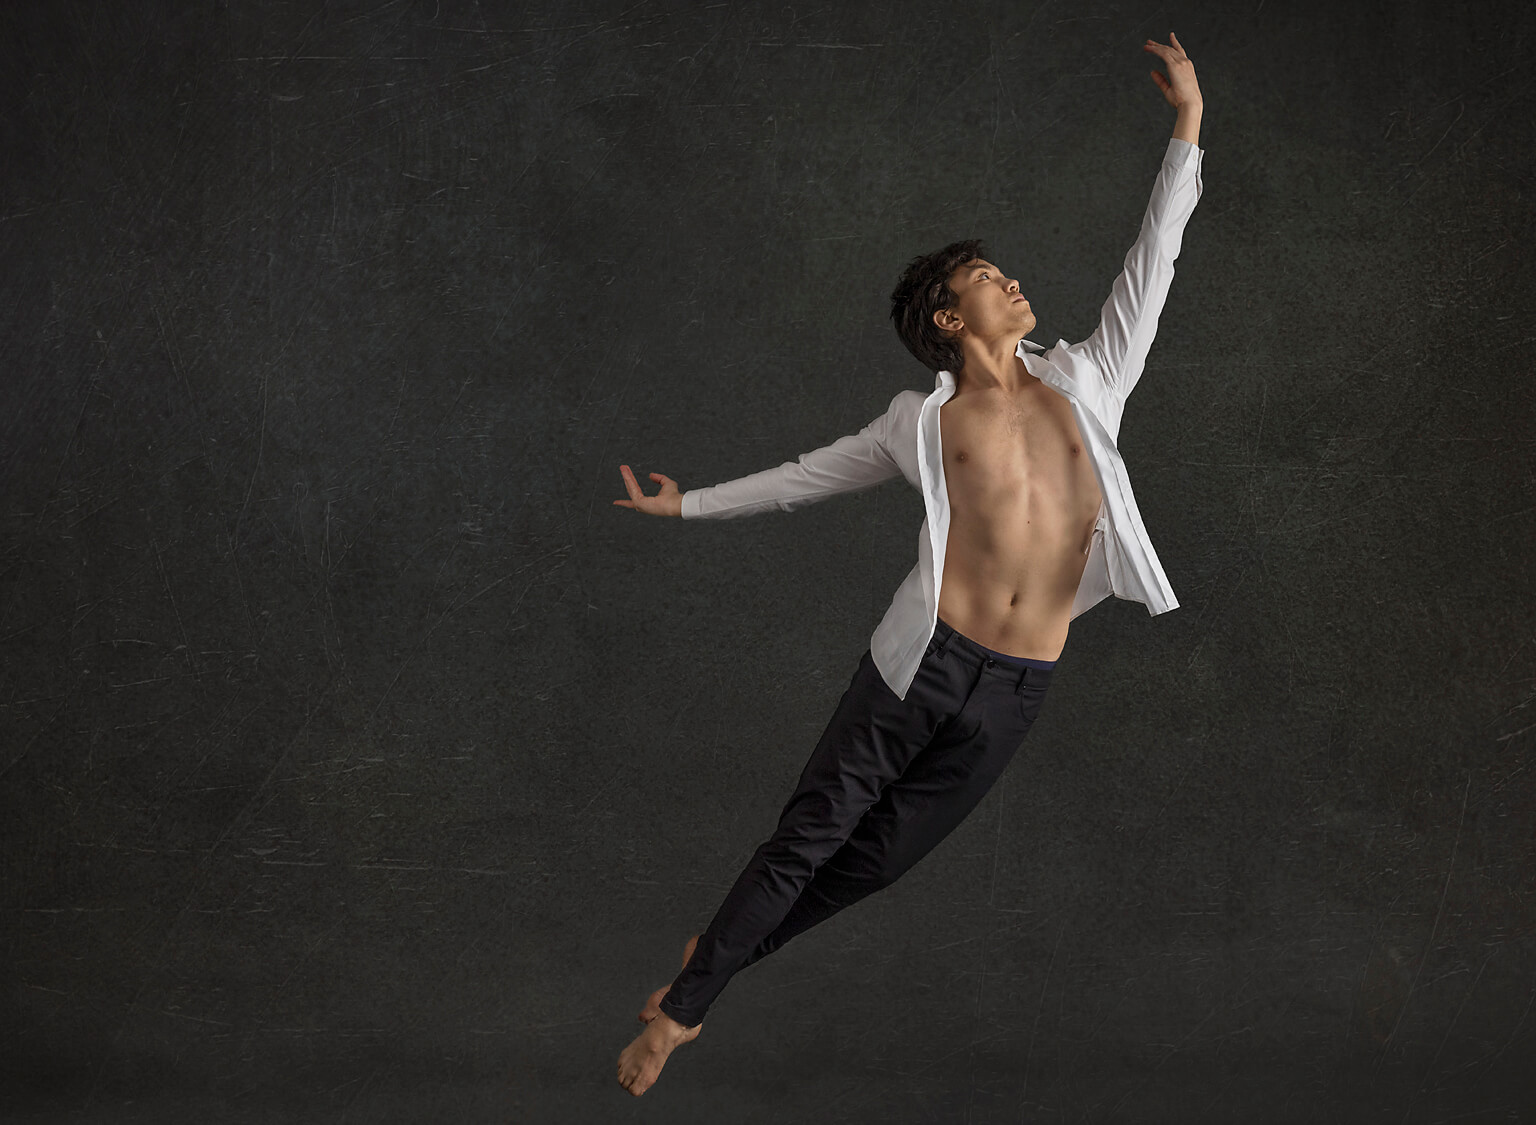 Los Angeles male dancer posing in photography studio